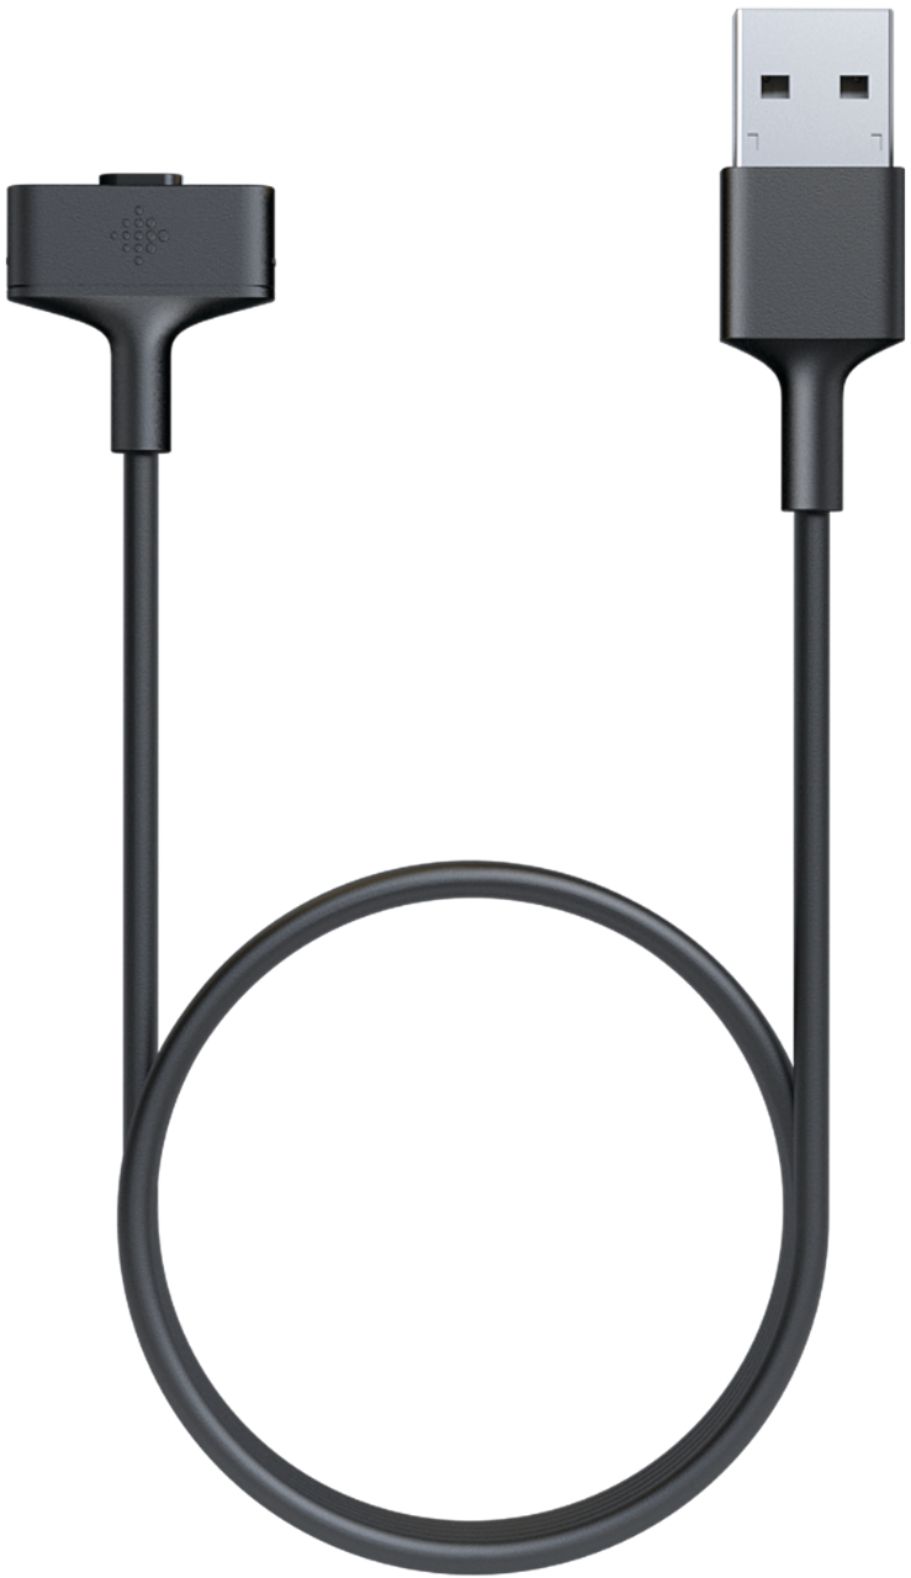 Charging Cable for Fitbit Ionic - Black